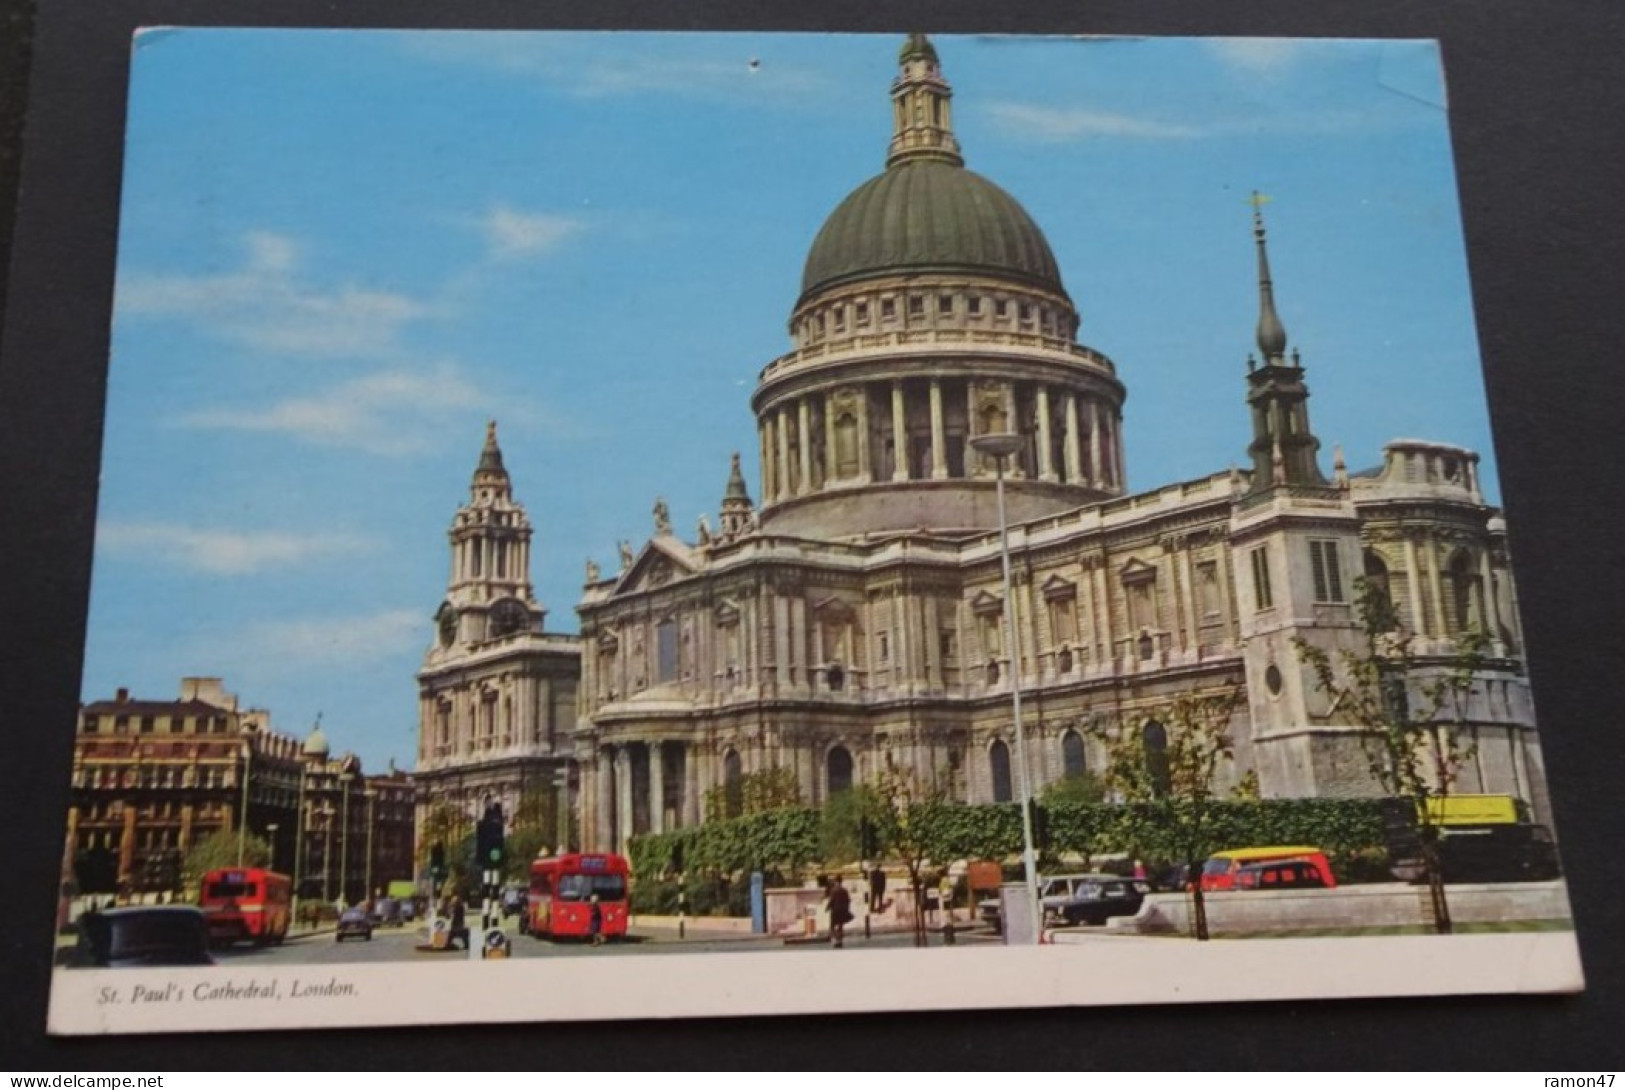 St. Paul's Cathedral, London - Published By I.V.P., London - # 104-C - St. Paul's Cathedral